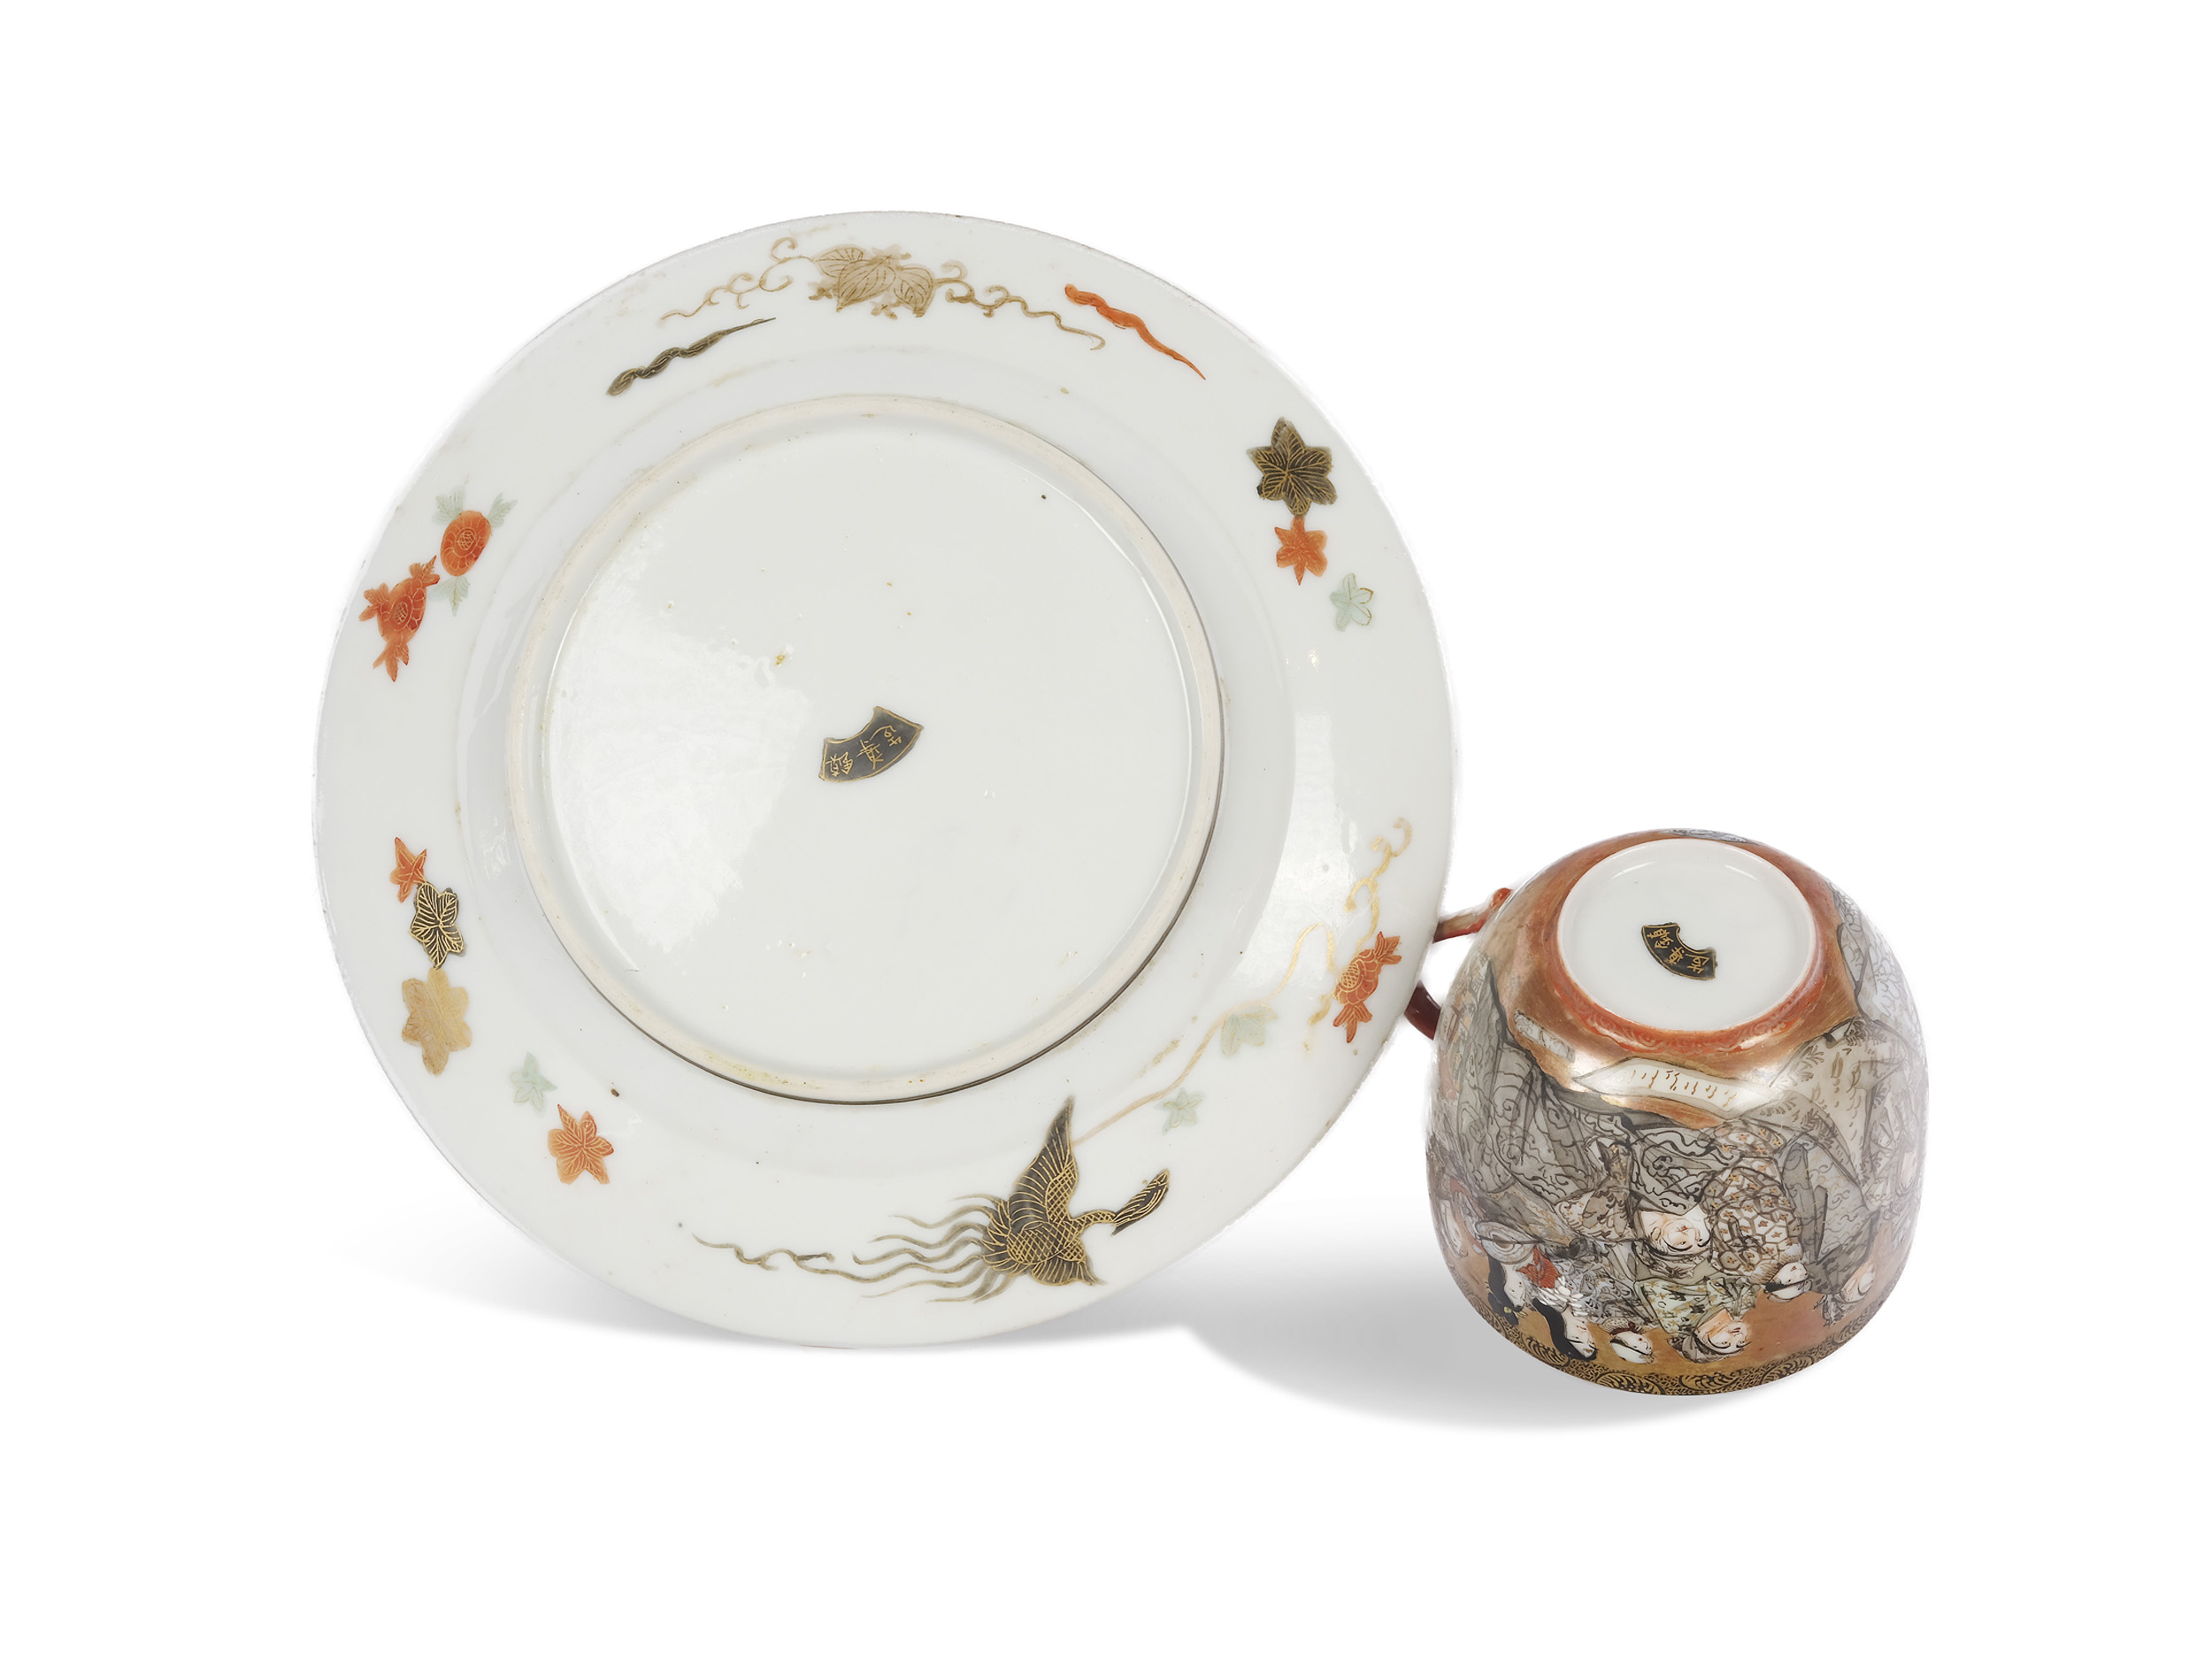 Cup with saucer, Japan, Meiji period, 1868-1912 - Image 3 of 3